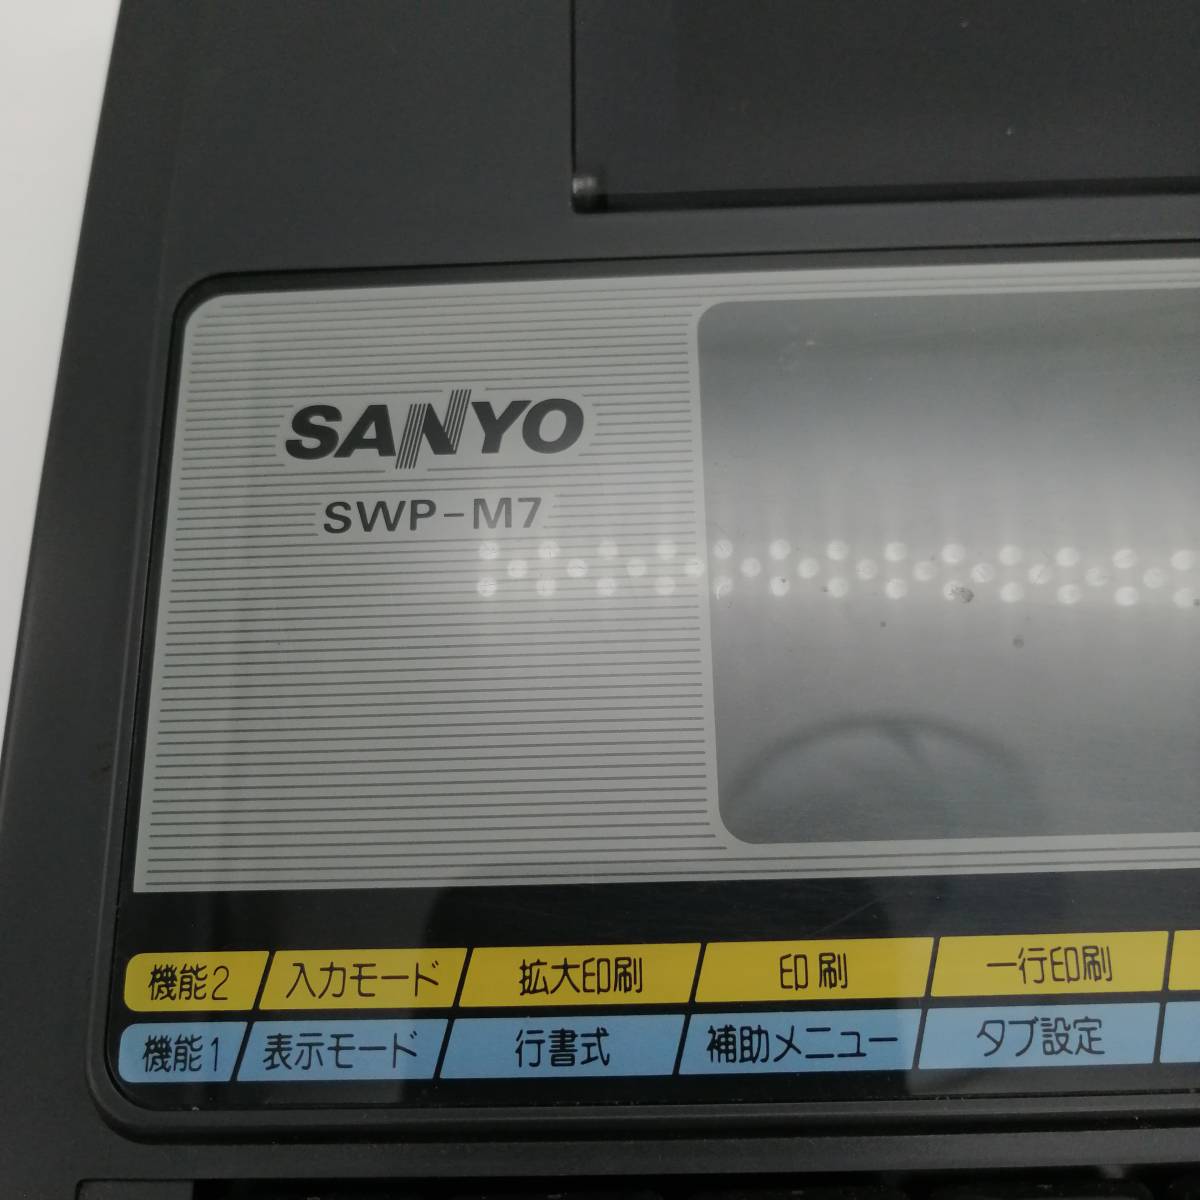 h3179 SANYO サンヨー ワープロ sanword7 SWP-M7 ワードプロセッサ レトロ 当時物 product details |  Proxy bidding and ordering service for auctions and shopping within Japan  and the United States - Get the latest news